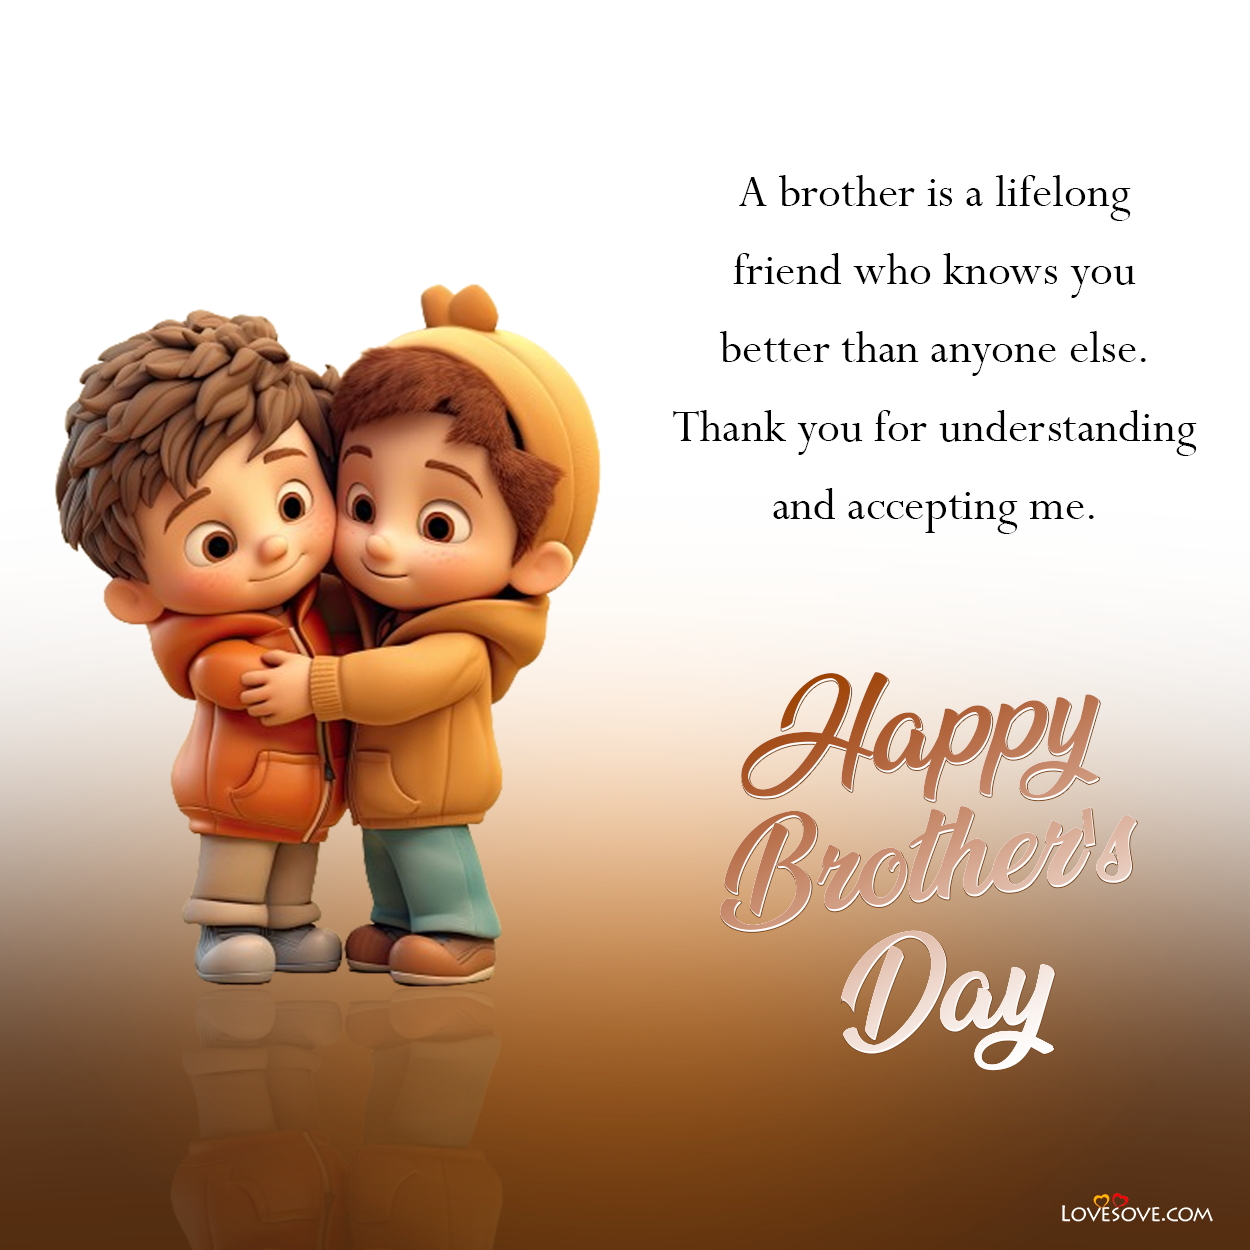 brothers day quotes short, happy brothers day wishes